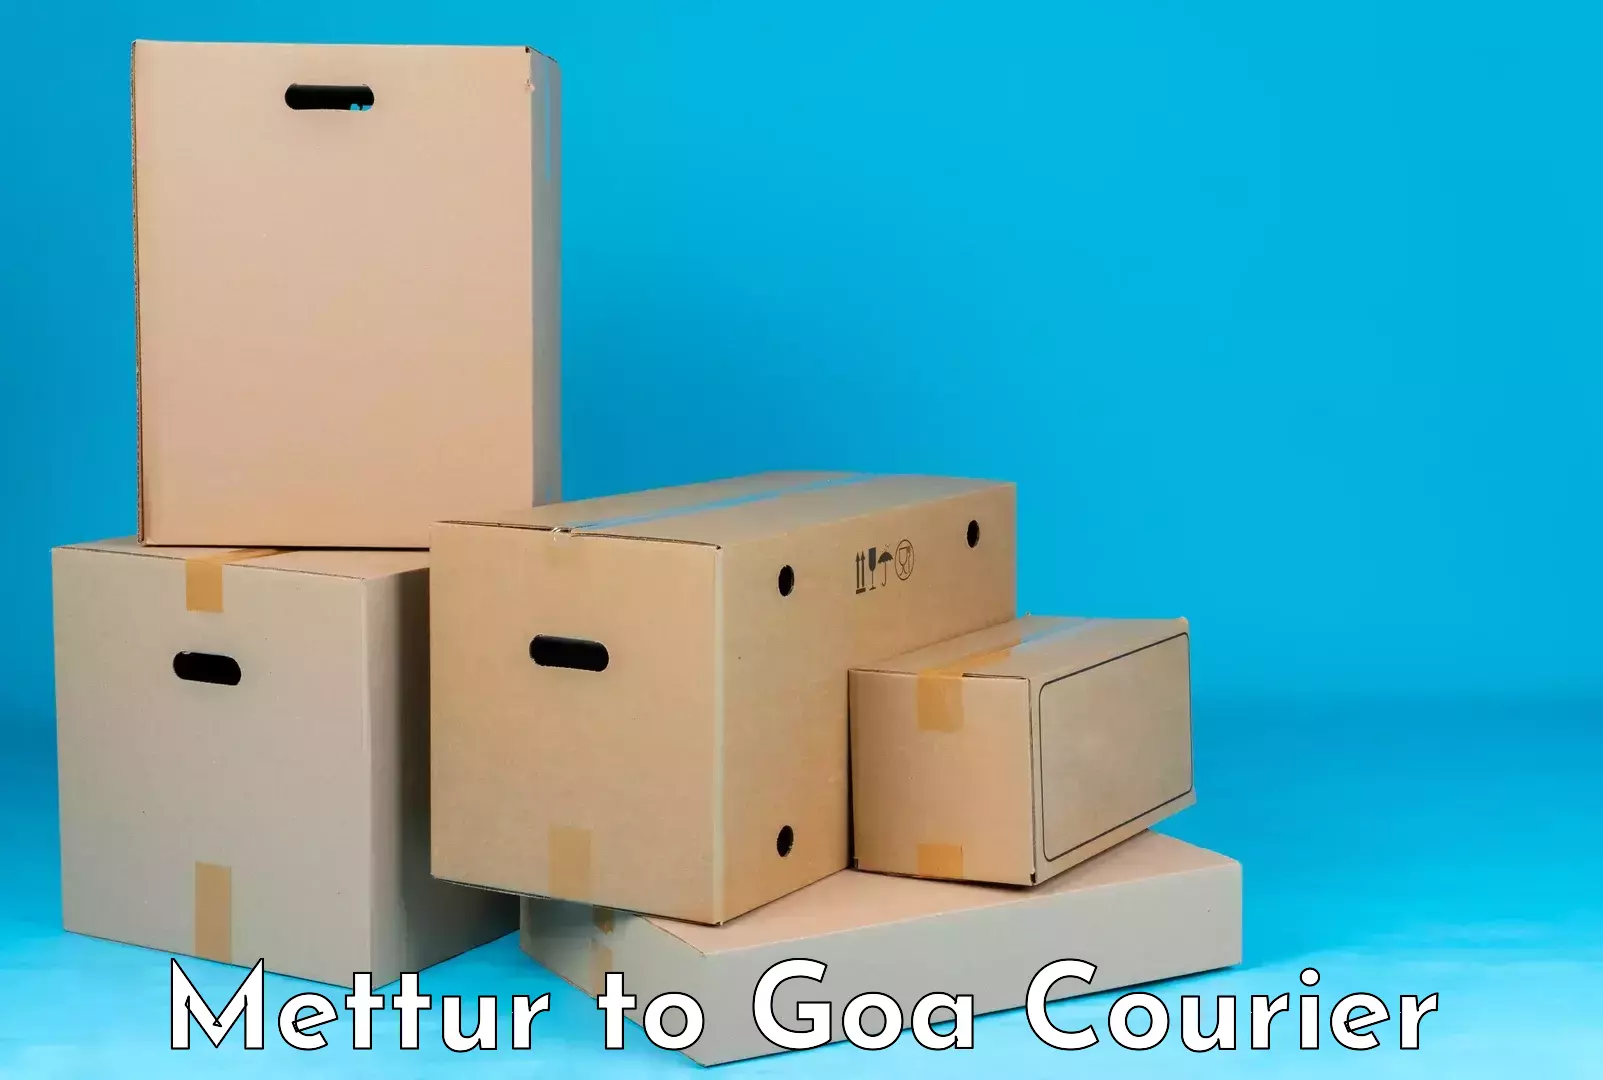 Nationwide luggage courier Mettur to Panaji